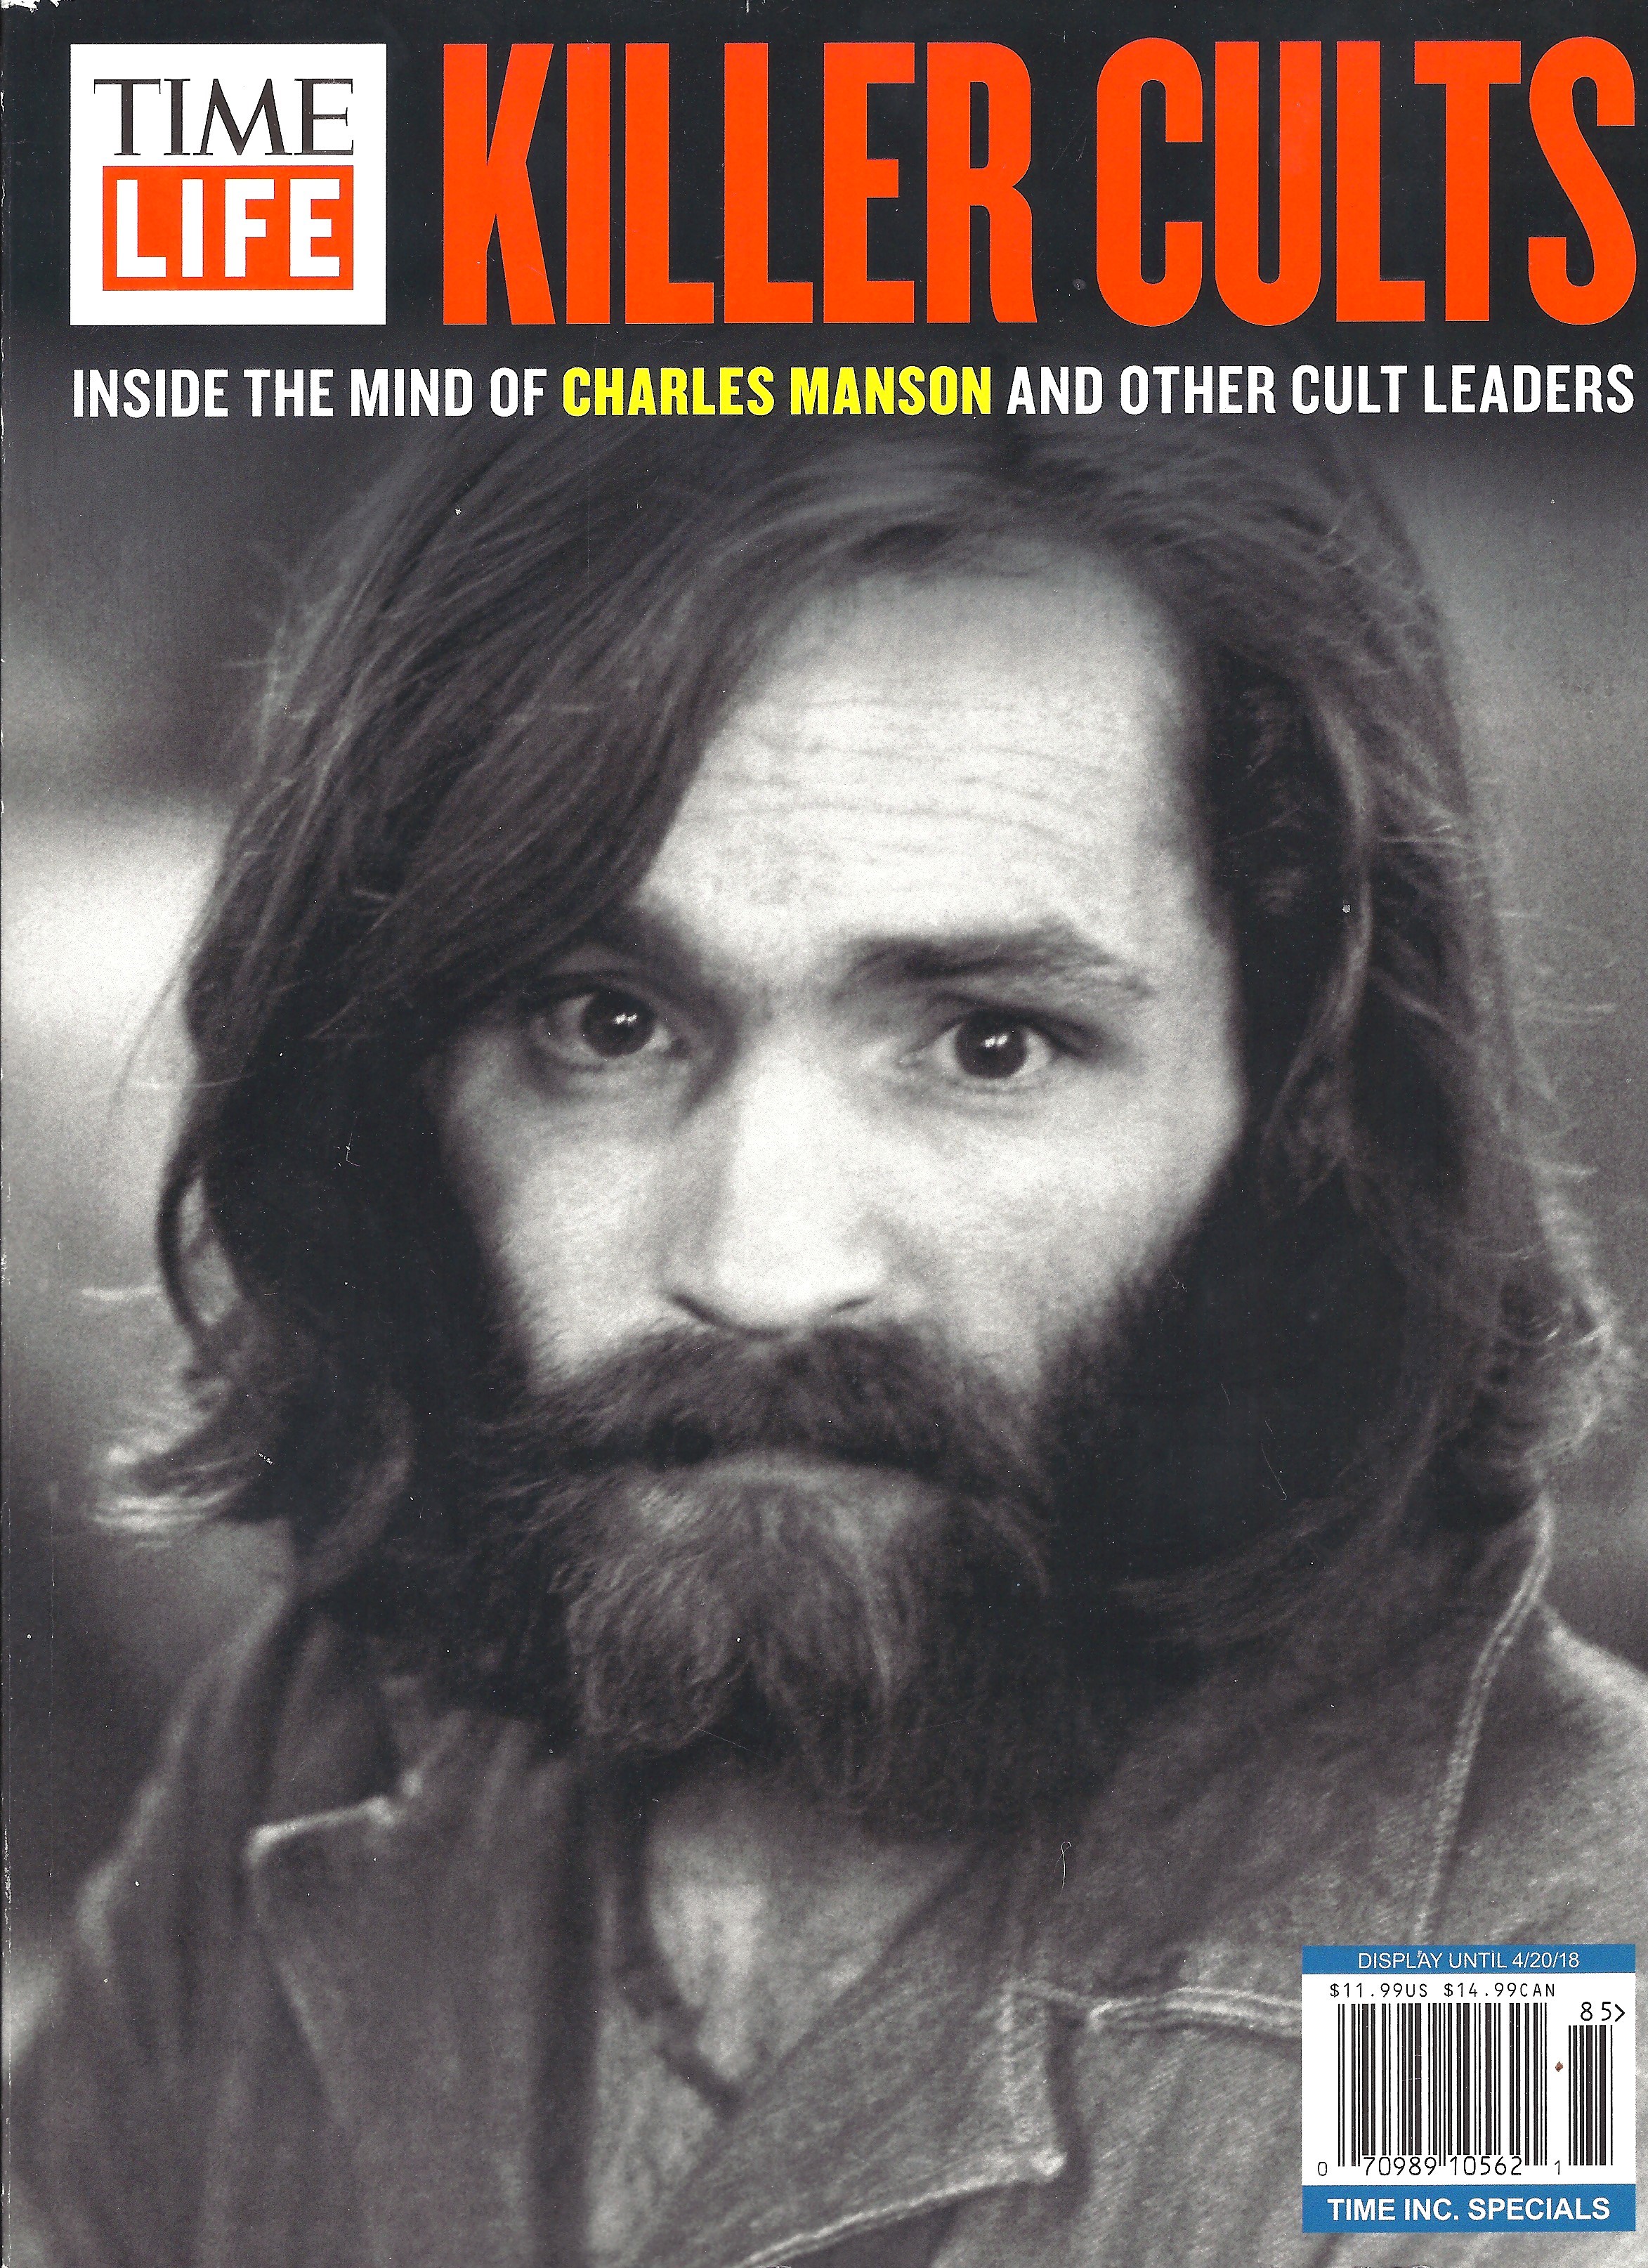 Review Time-Life's Killer Cults – Inside the Mind of Charles